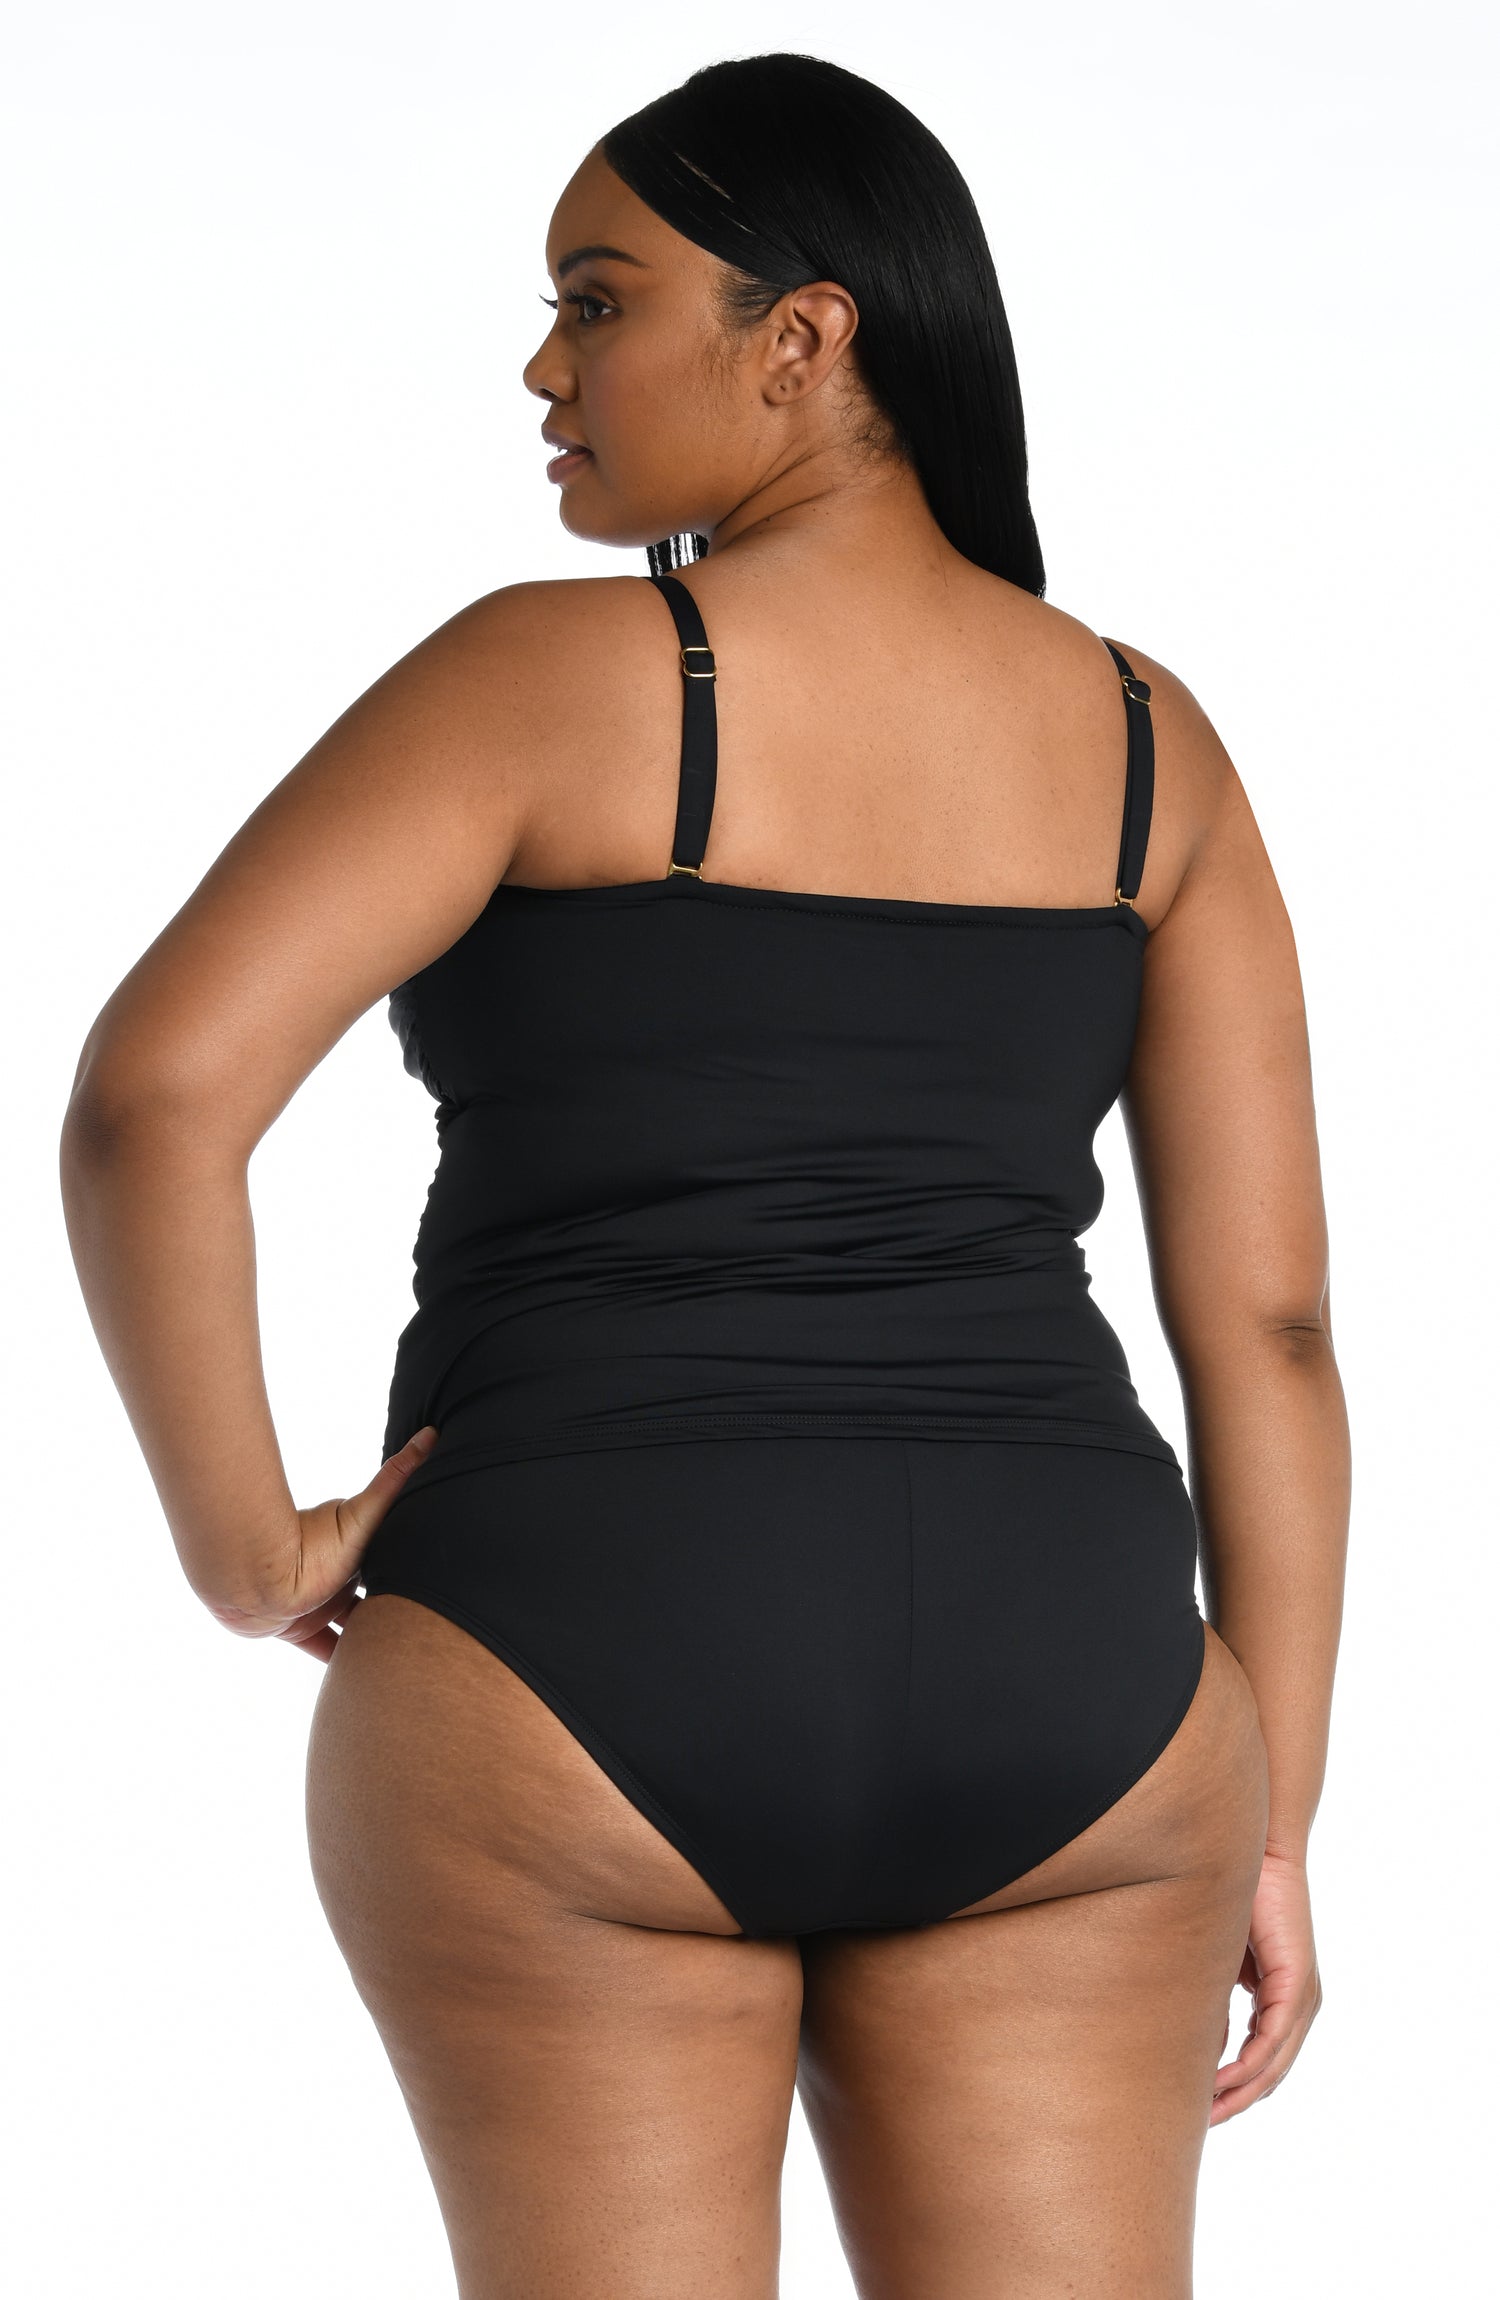 Model is wearing a black bandeau tankini swimsuit top from our Best-Selling Island Goddess collection.